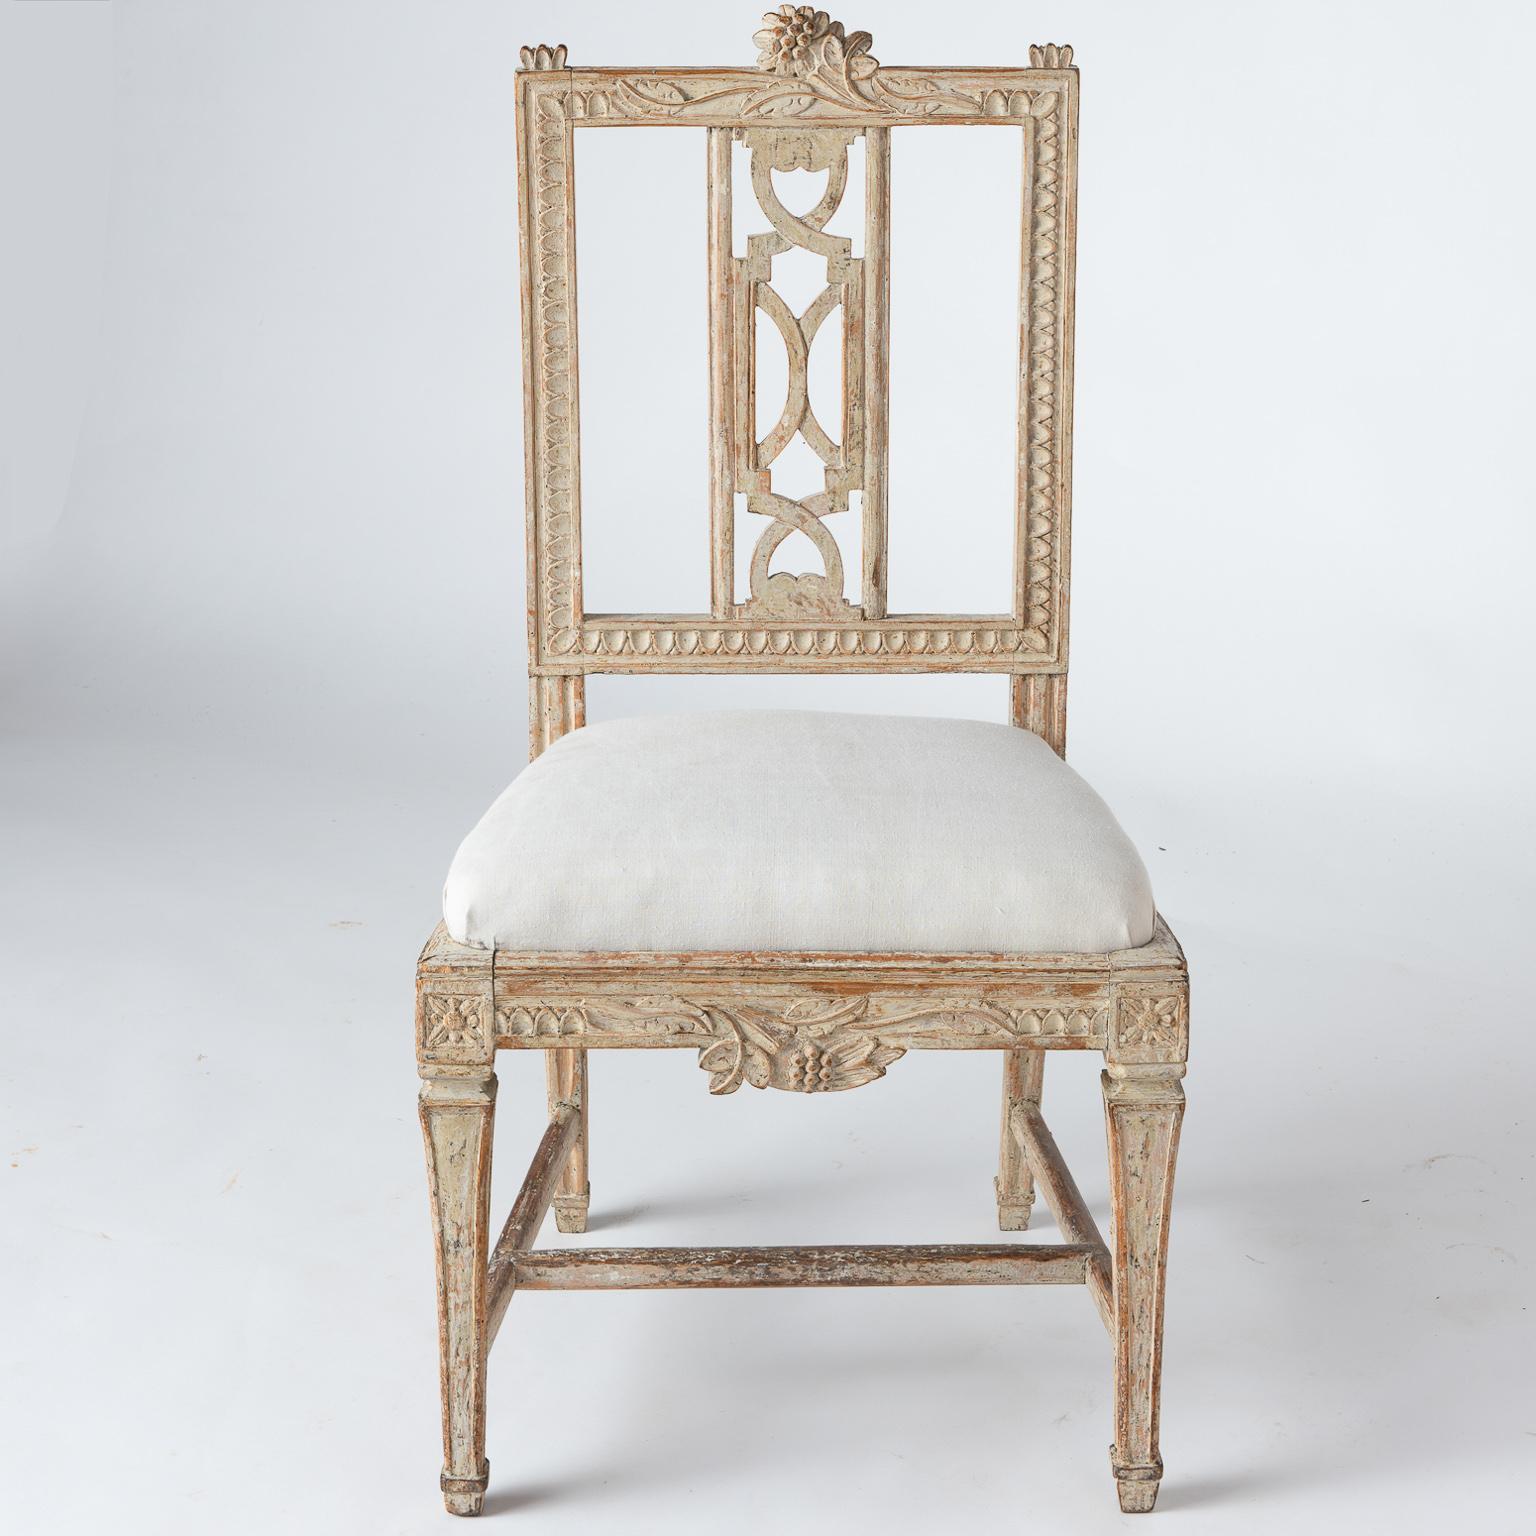 These beautifully crafted chairs were designed by Carl Wilhelm Carlsberg, a noted chair maker in Lindome Sweden, in the 18th and early 19th century. This model of chair was created for the dining room at the Gunnebo Manor House outside of